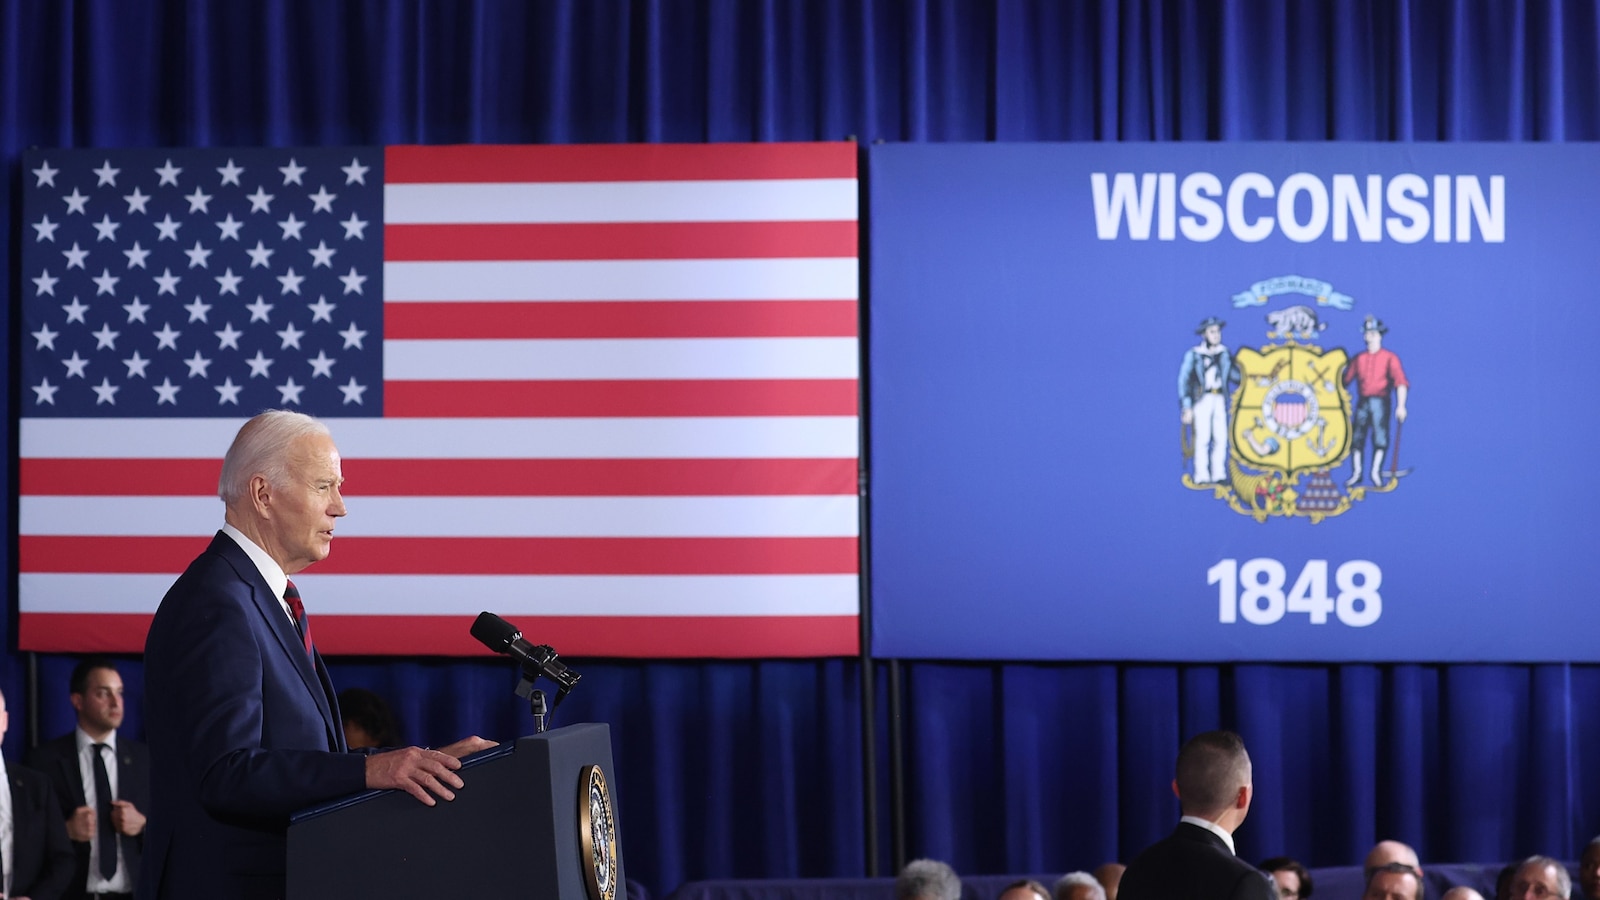 Bidens path to winning the Electoral College runs through the Midwest [Video]